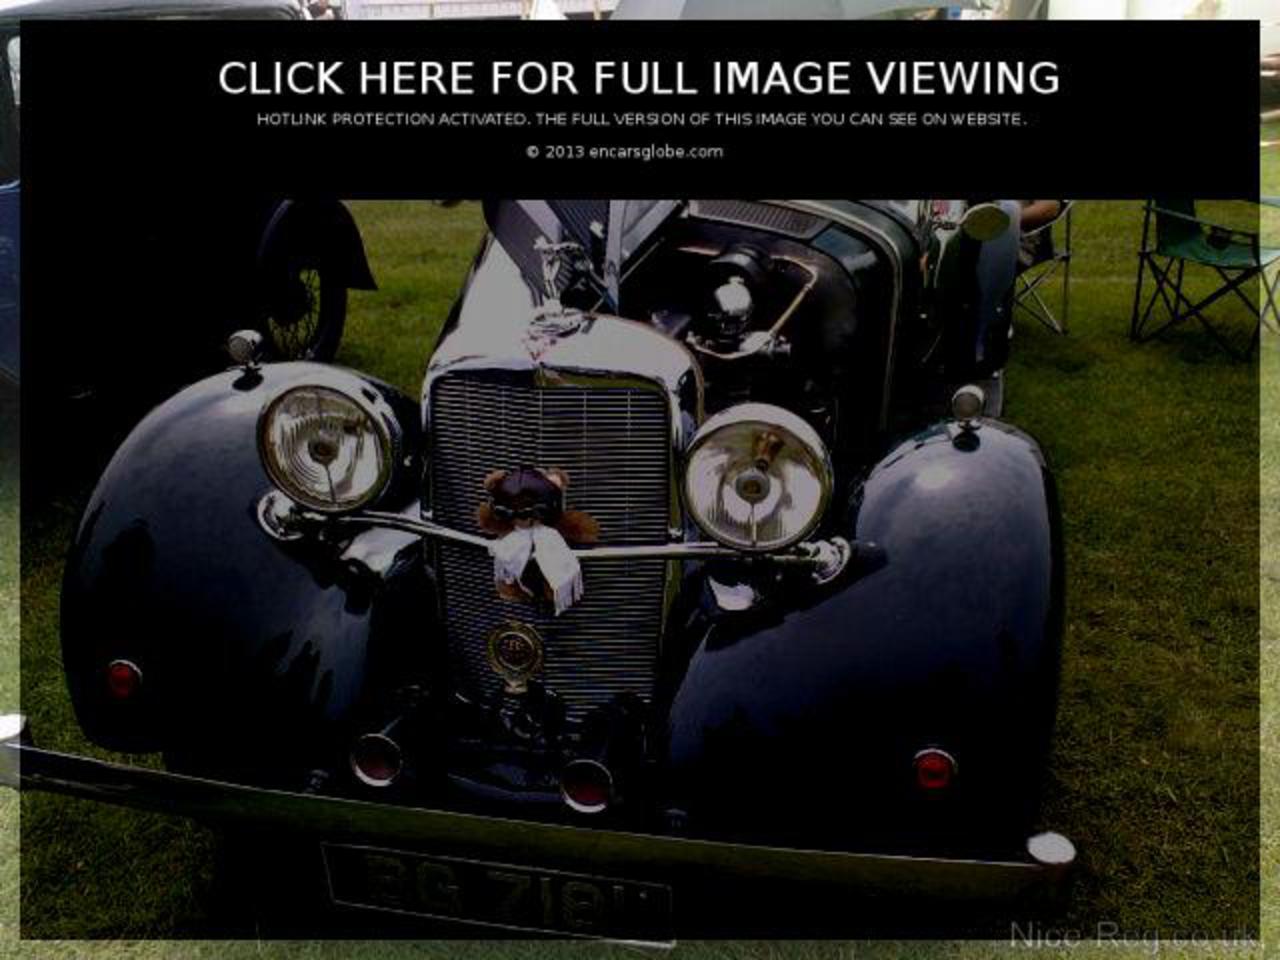 Alvis 1270: Photo gallery, complete information about model ...